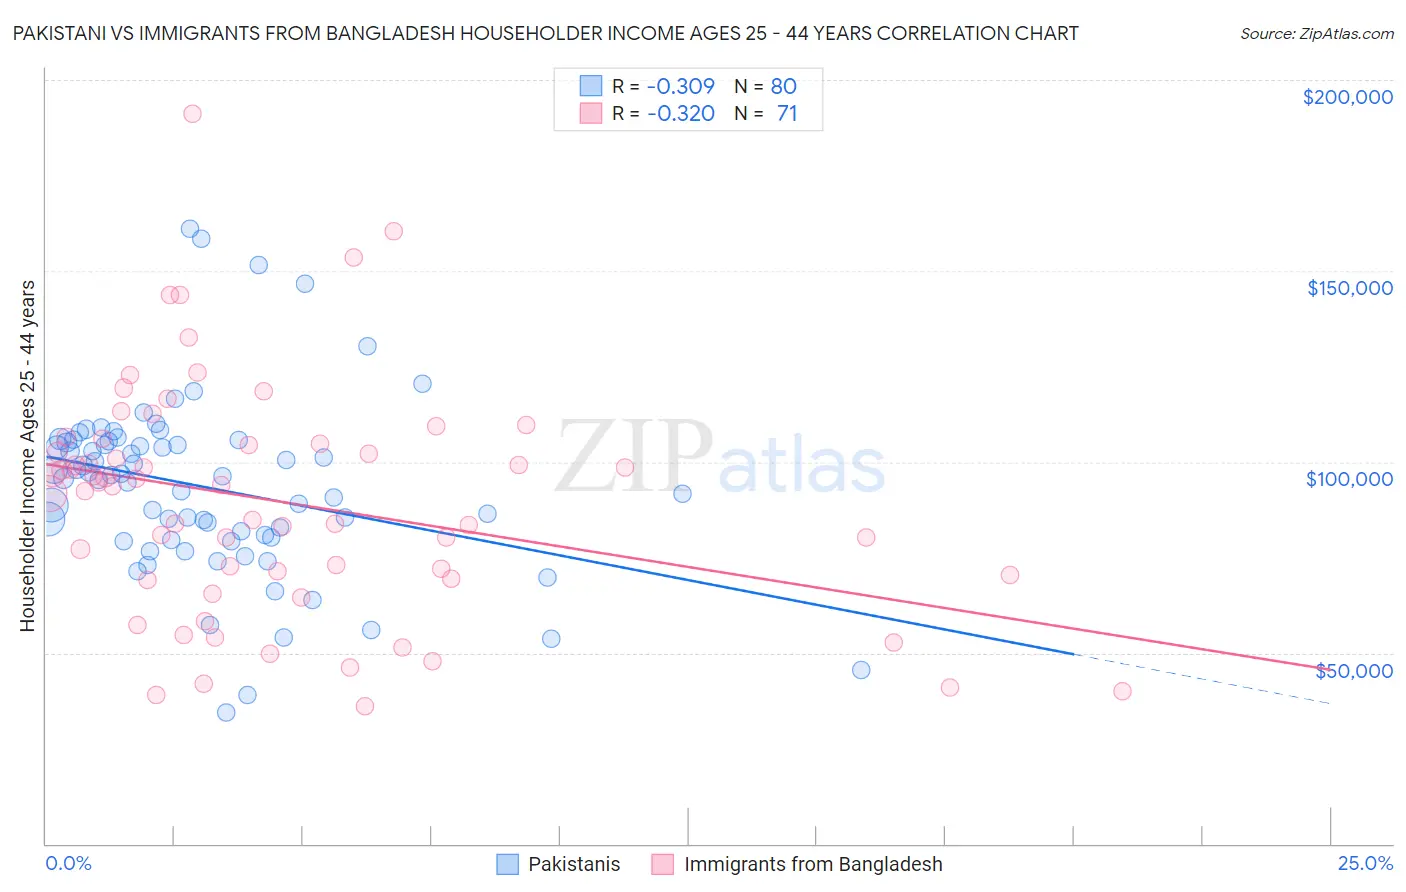 Pakistani vs Immigrants from Bangladesh Householder Income Ages 25 - 44 years